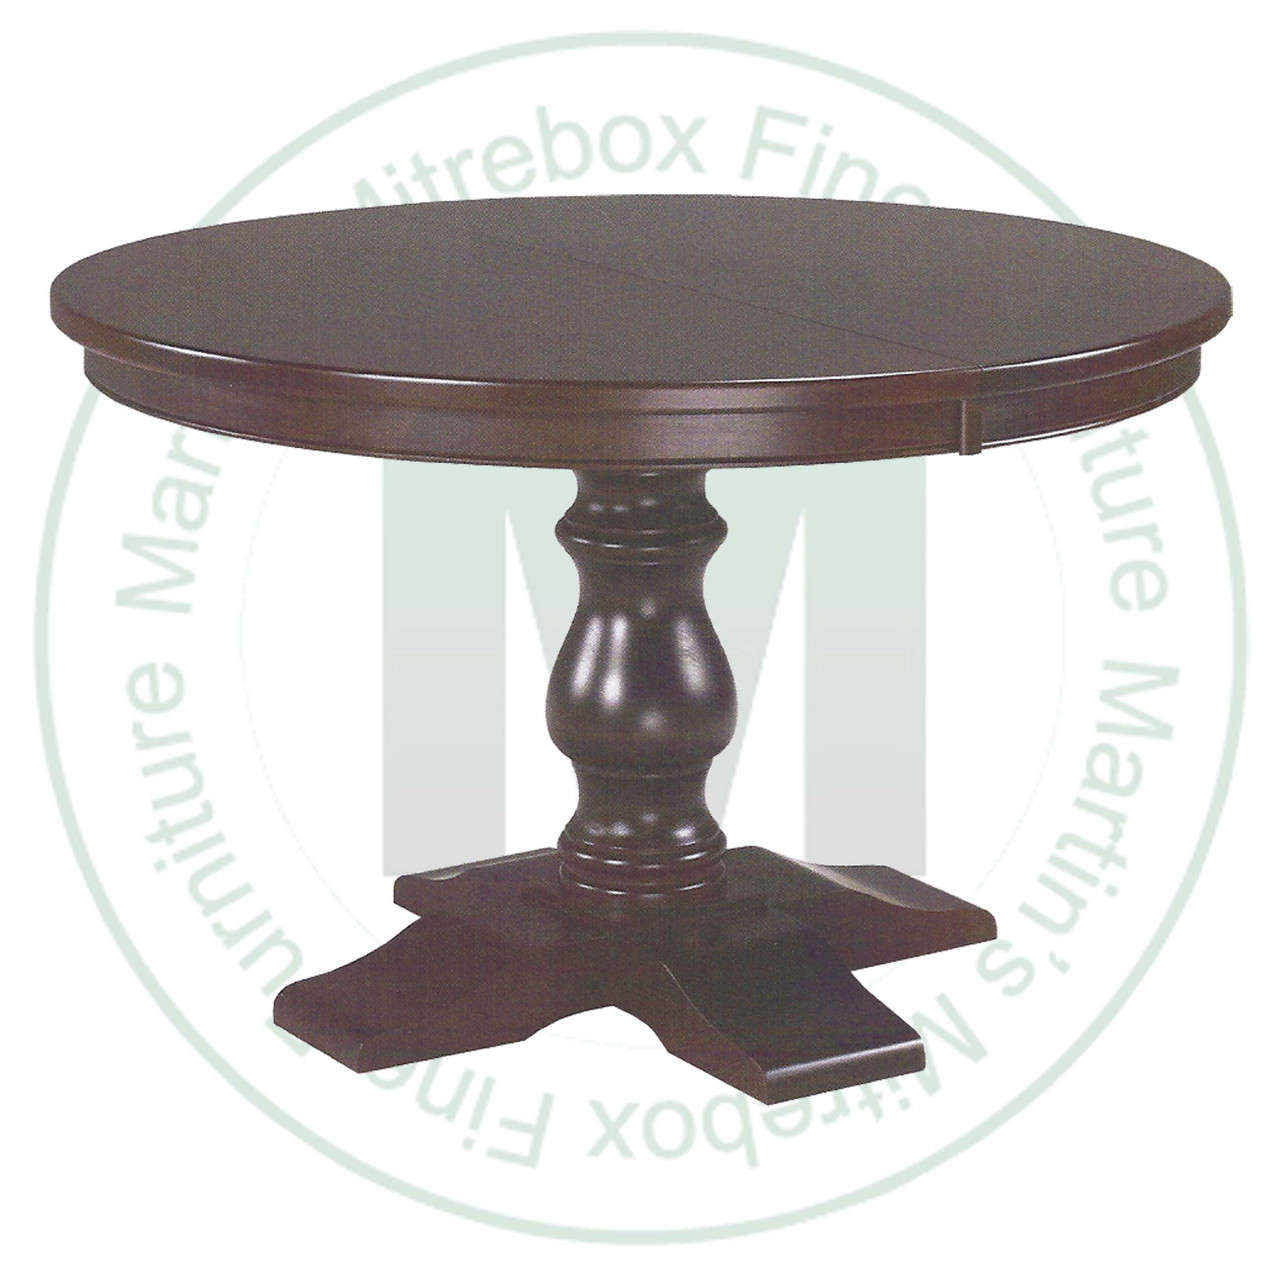 Oak Savannah Single Pedestal Table 60''D x 60''W x 30''H Round Solid Table. Table Has 1'' Thick Top.